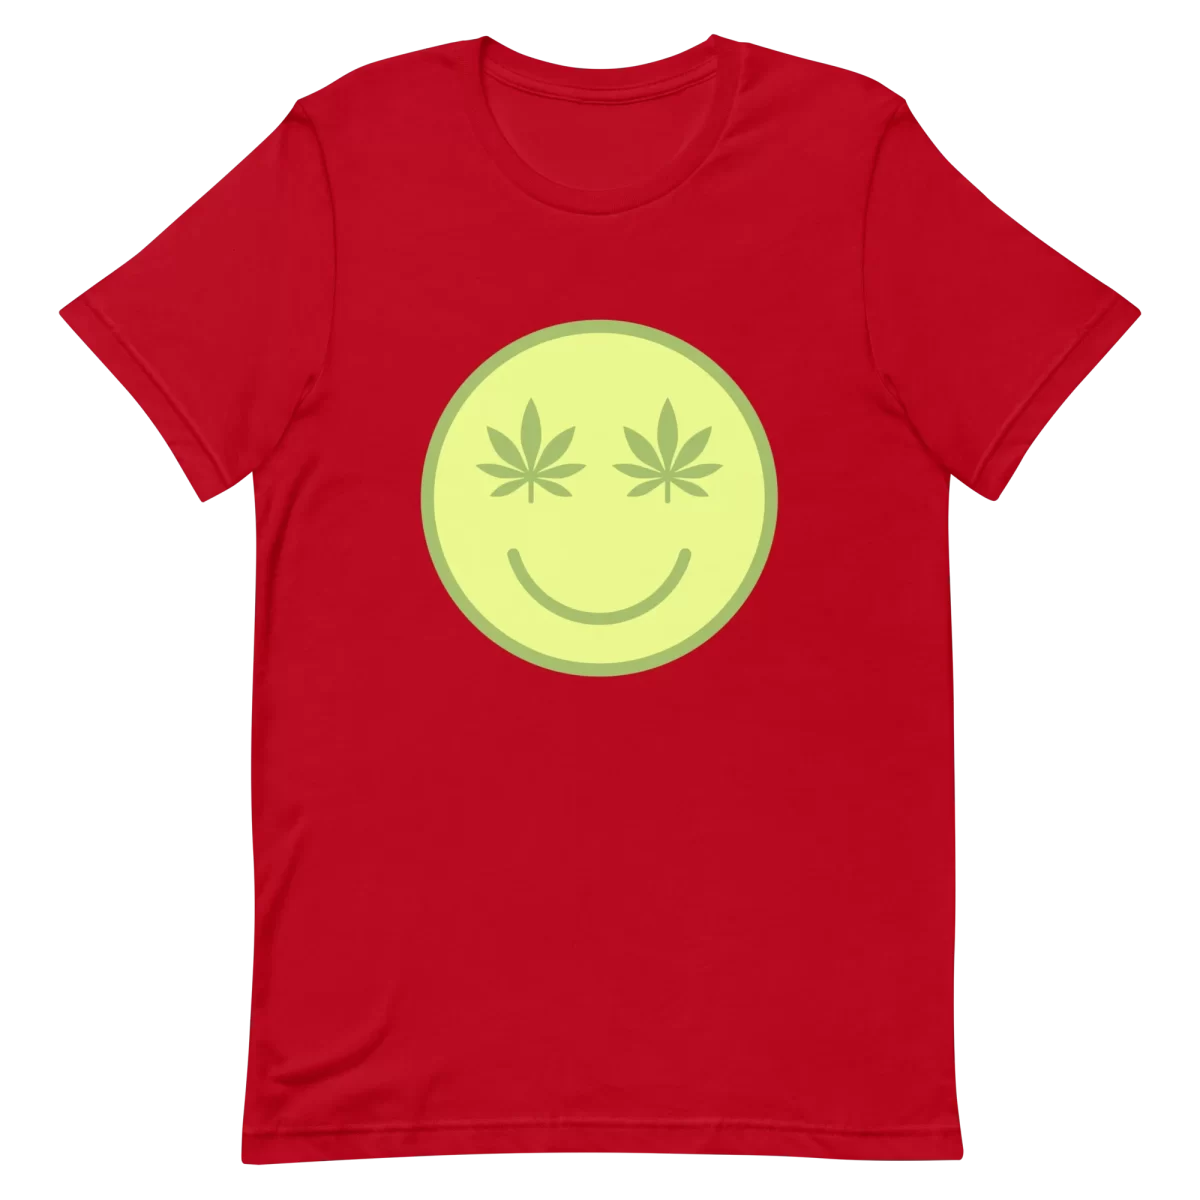 Unisex T-Shirt - Smiley Face with weed - Red